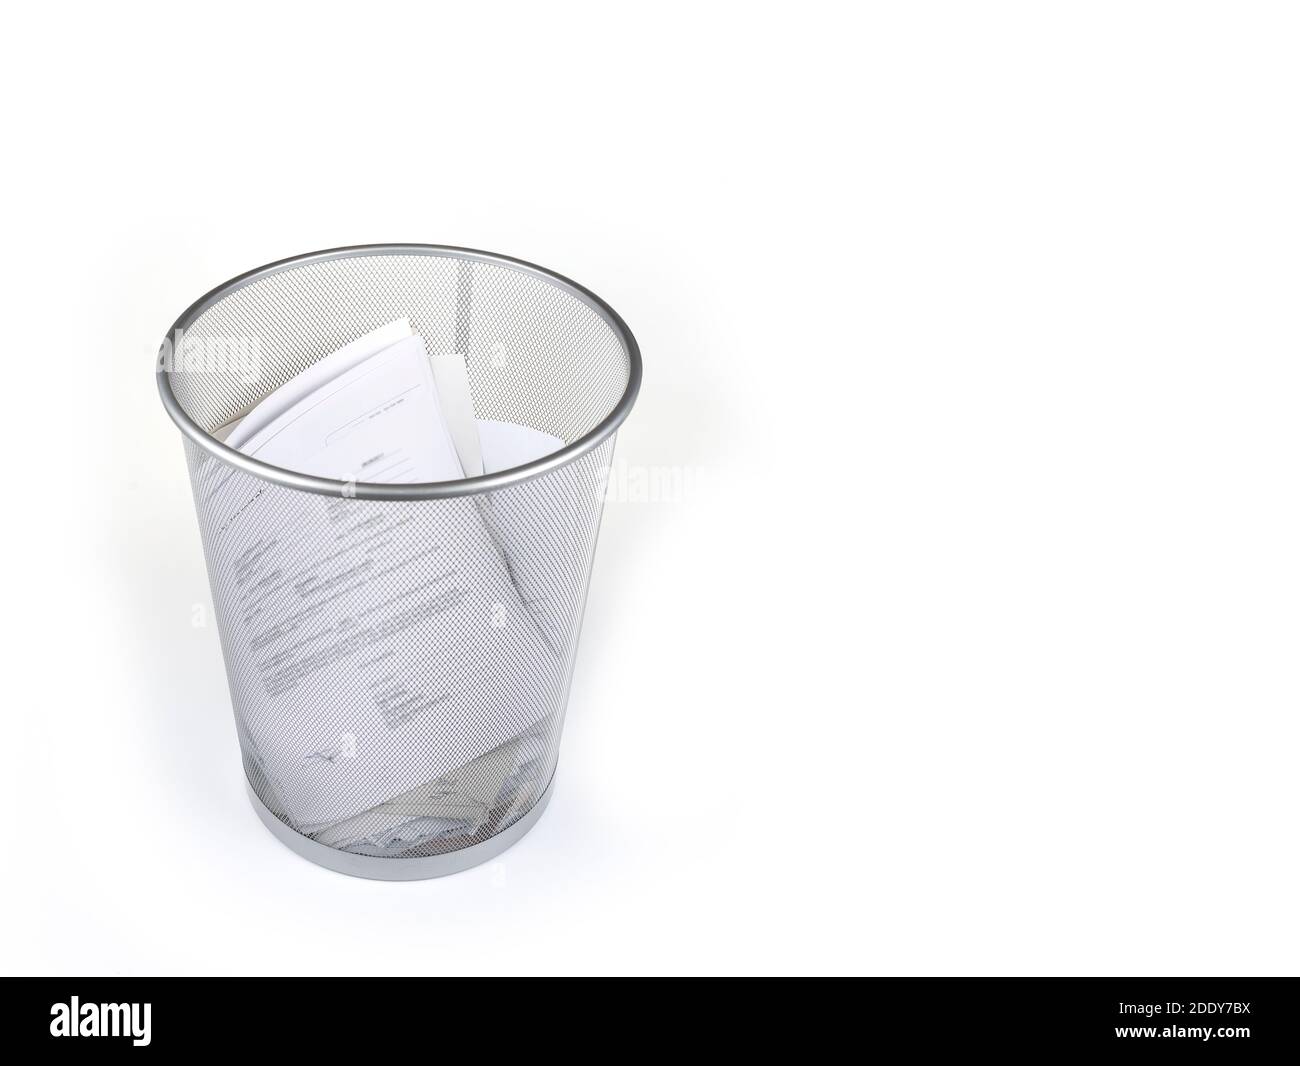 https://c8.alamy.com/comp/2DDY7BX/office-trash-can-full-with-documents-on-a-white-2DDY7BX.jpg